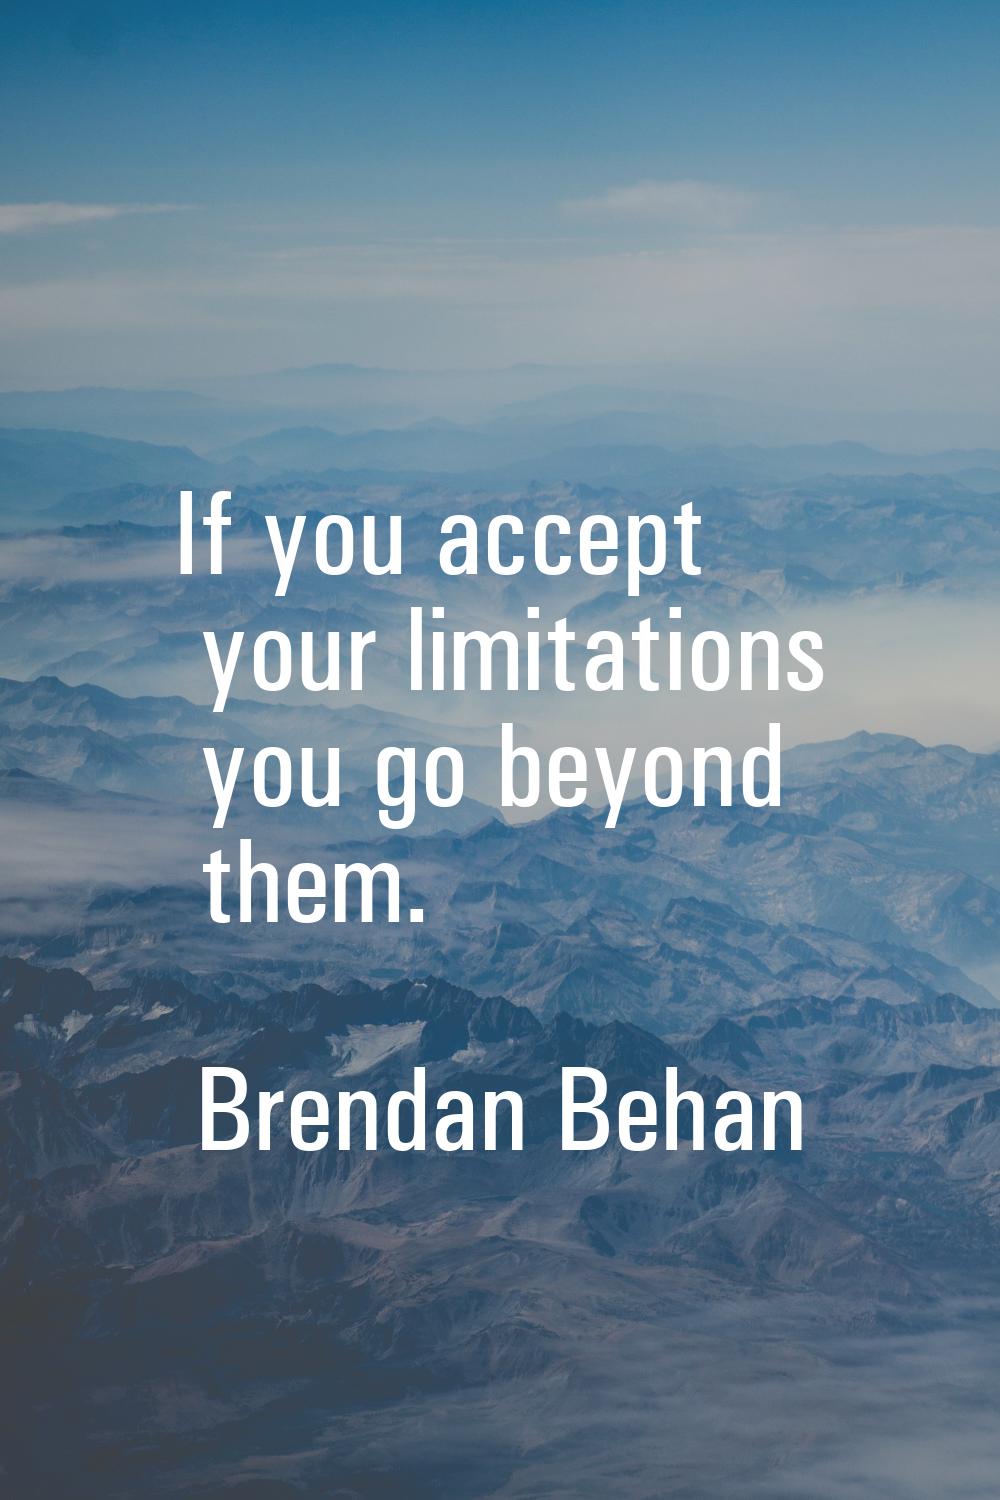 If you accept your limitations you go beyond them.